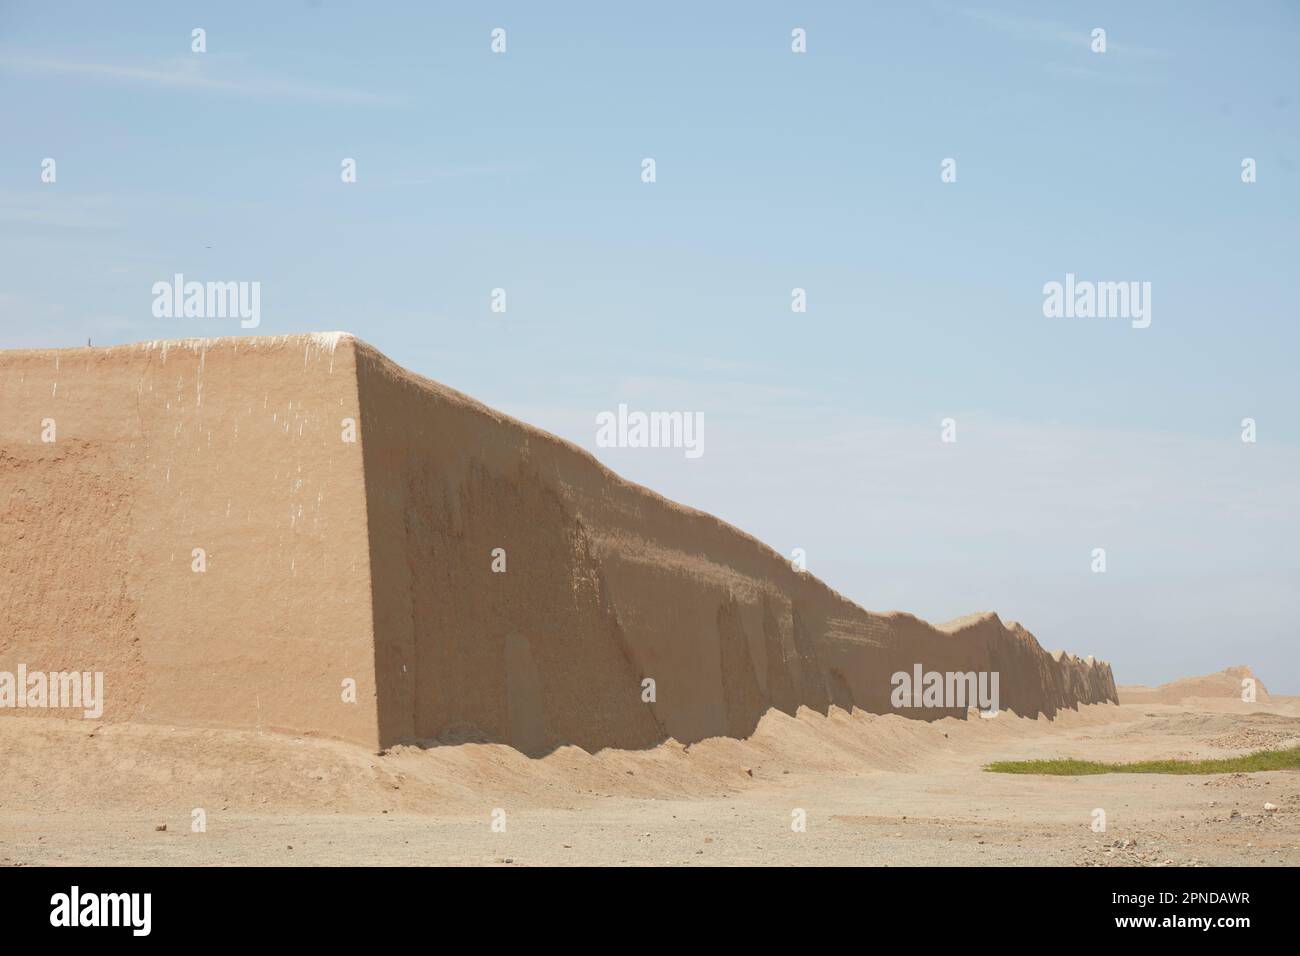 The Chan Chan pre-Columbian archaeological fortress wall, Trujillo, La Libertad, Peru, South America. It was declared a UNESCO World Heritage Site. Stock Photo